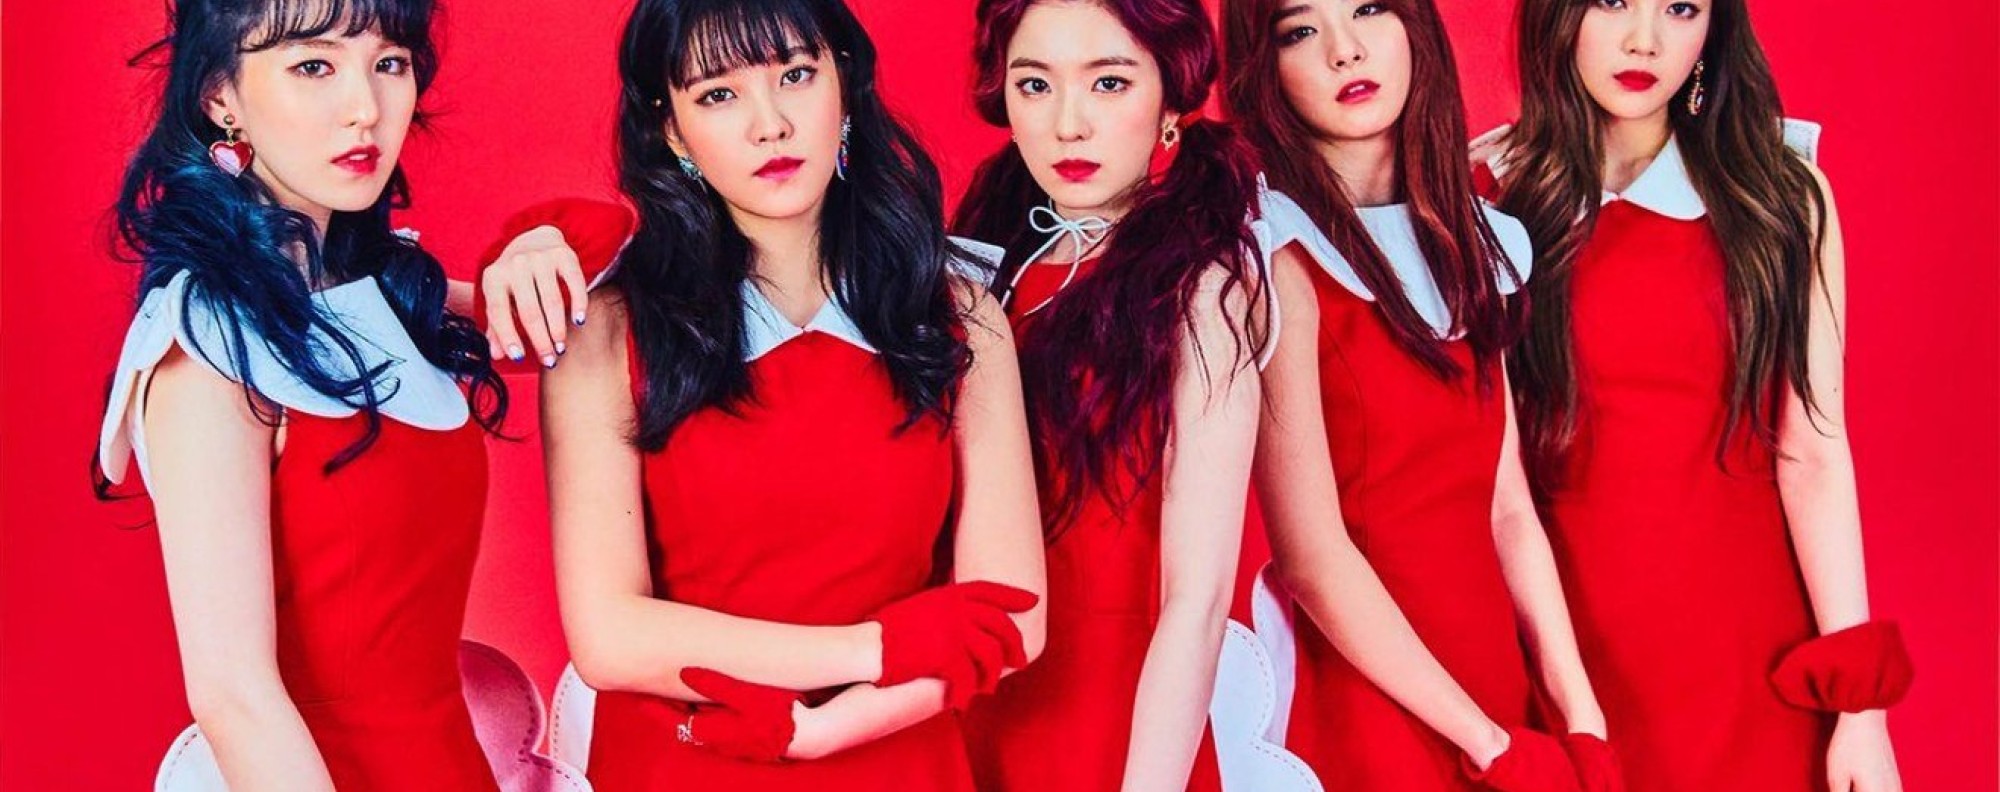 Red Velvet Members: K-Pop Group Ages, Songs and More